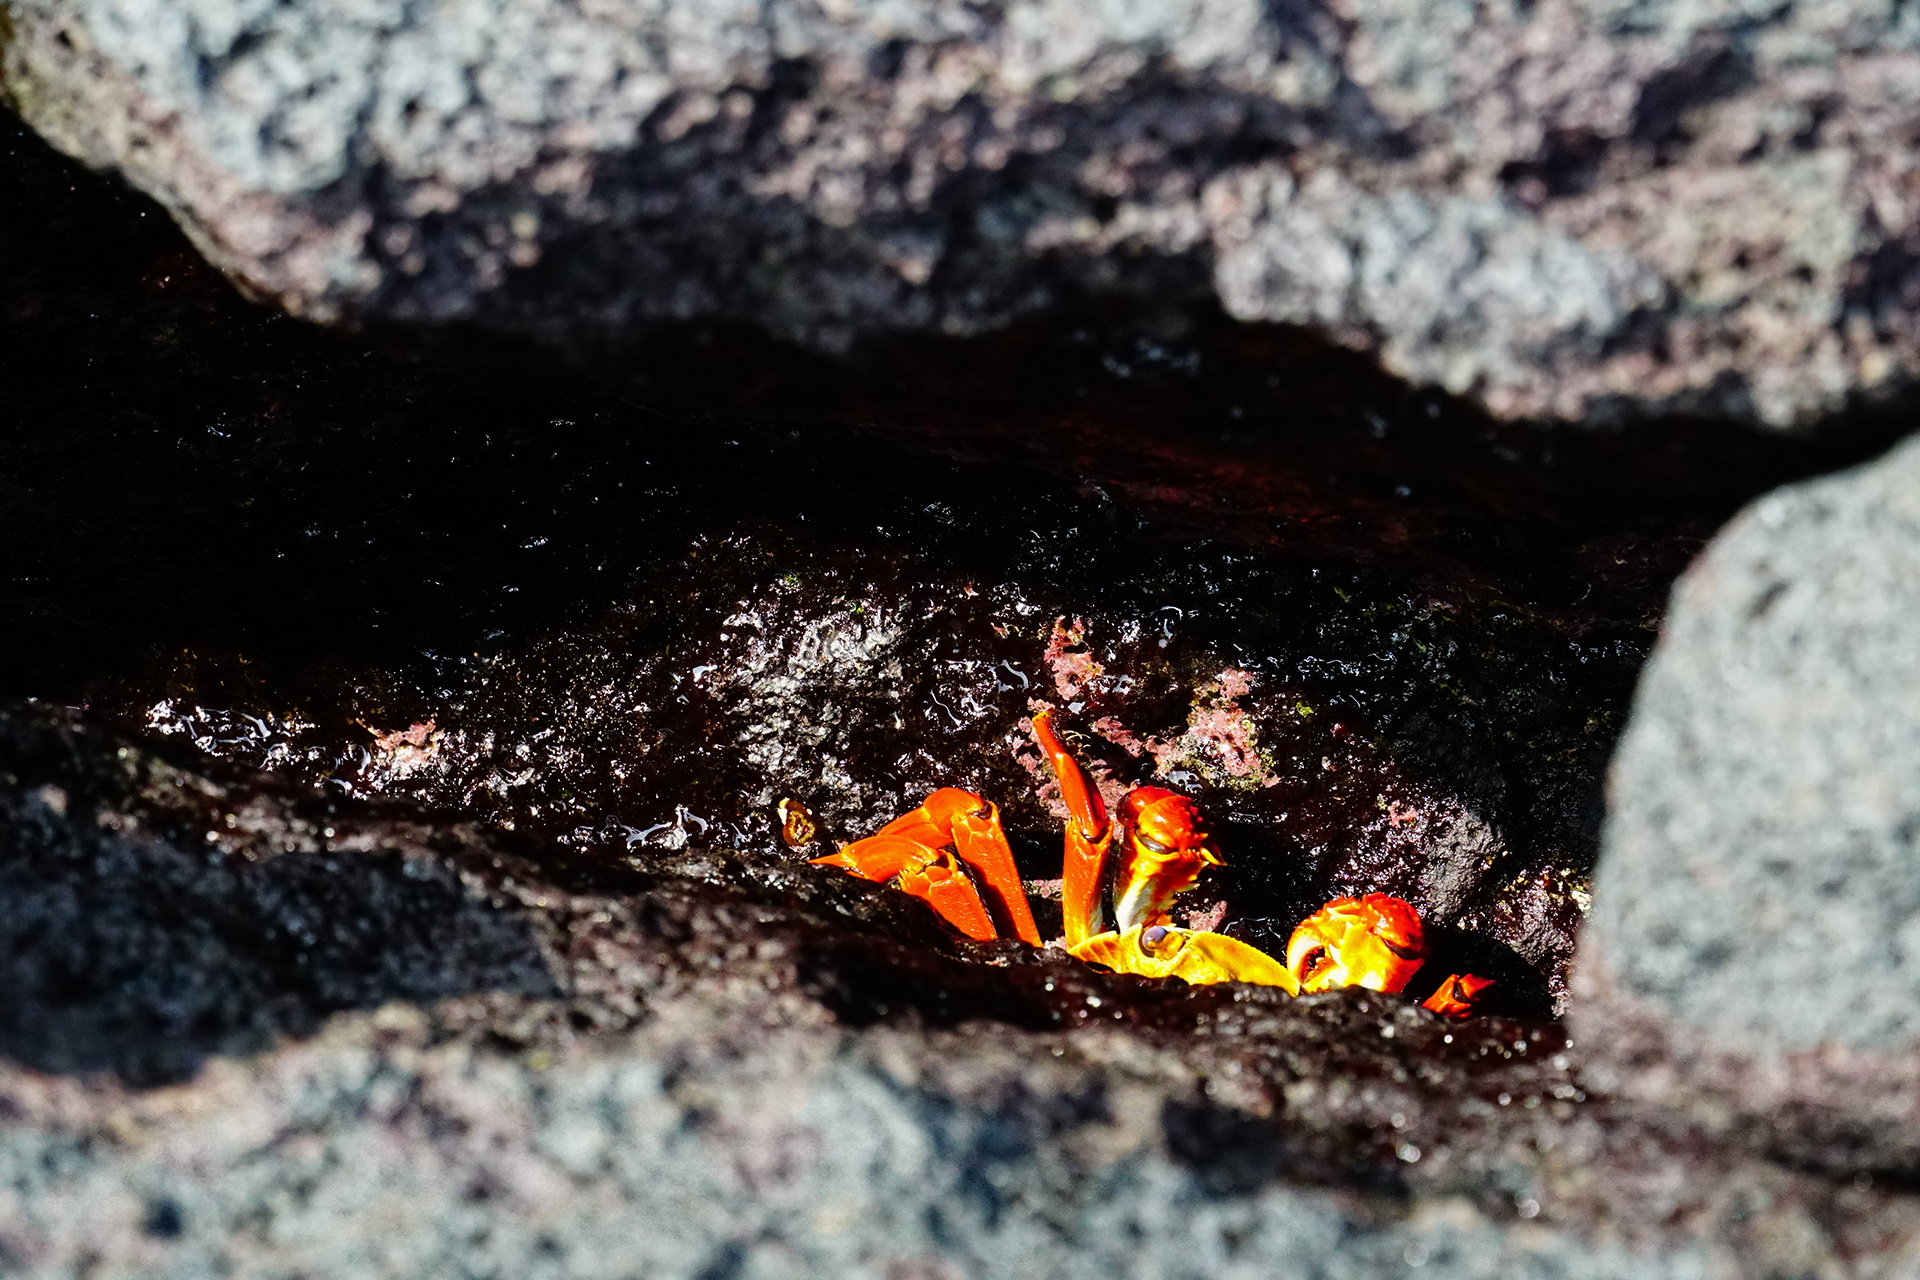 A Lightfoot Sally crab hides in a crack in the black volcanic rocks in the Galápagos Islands.